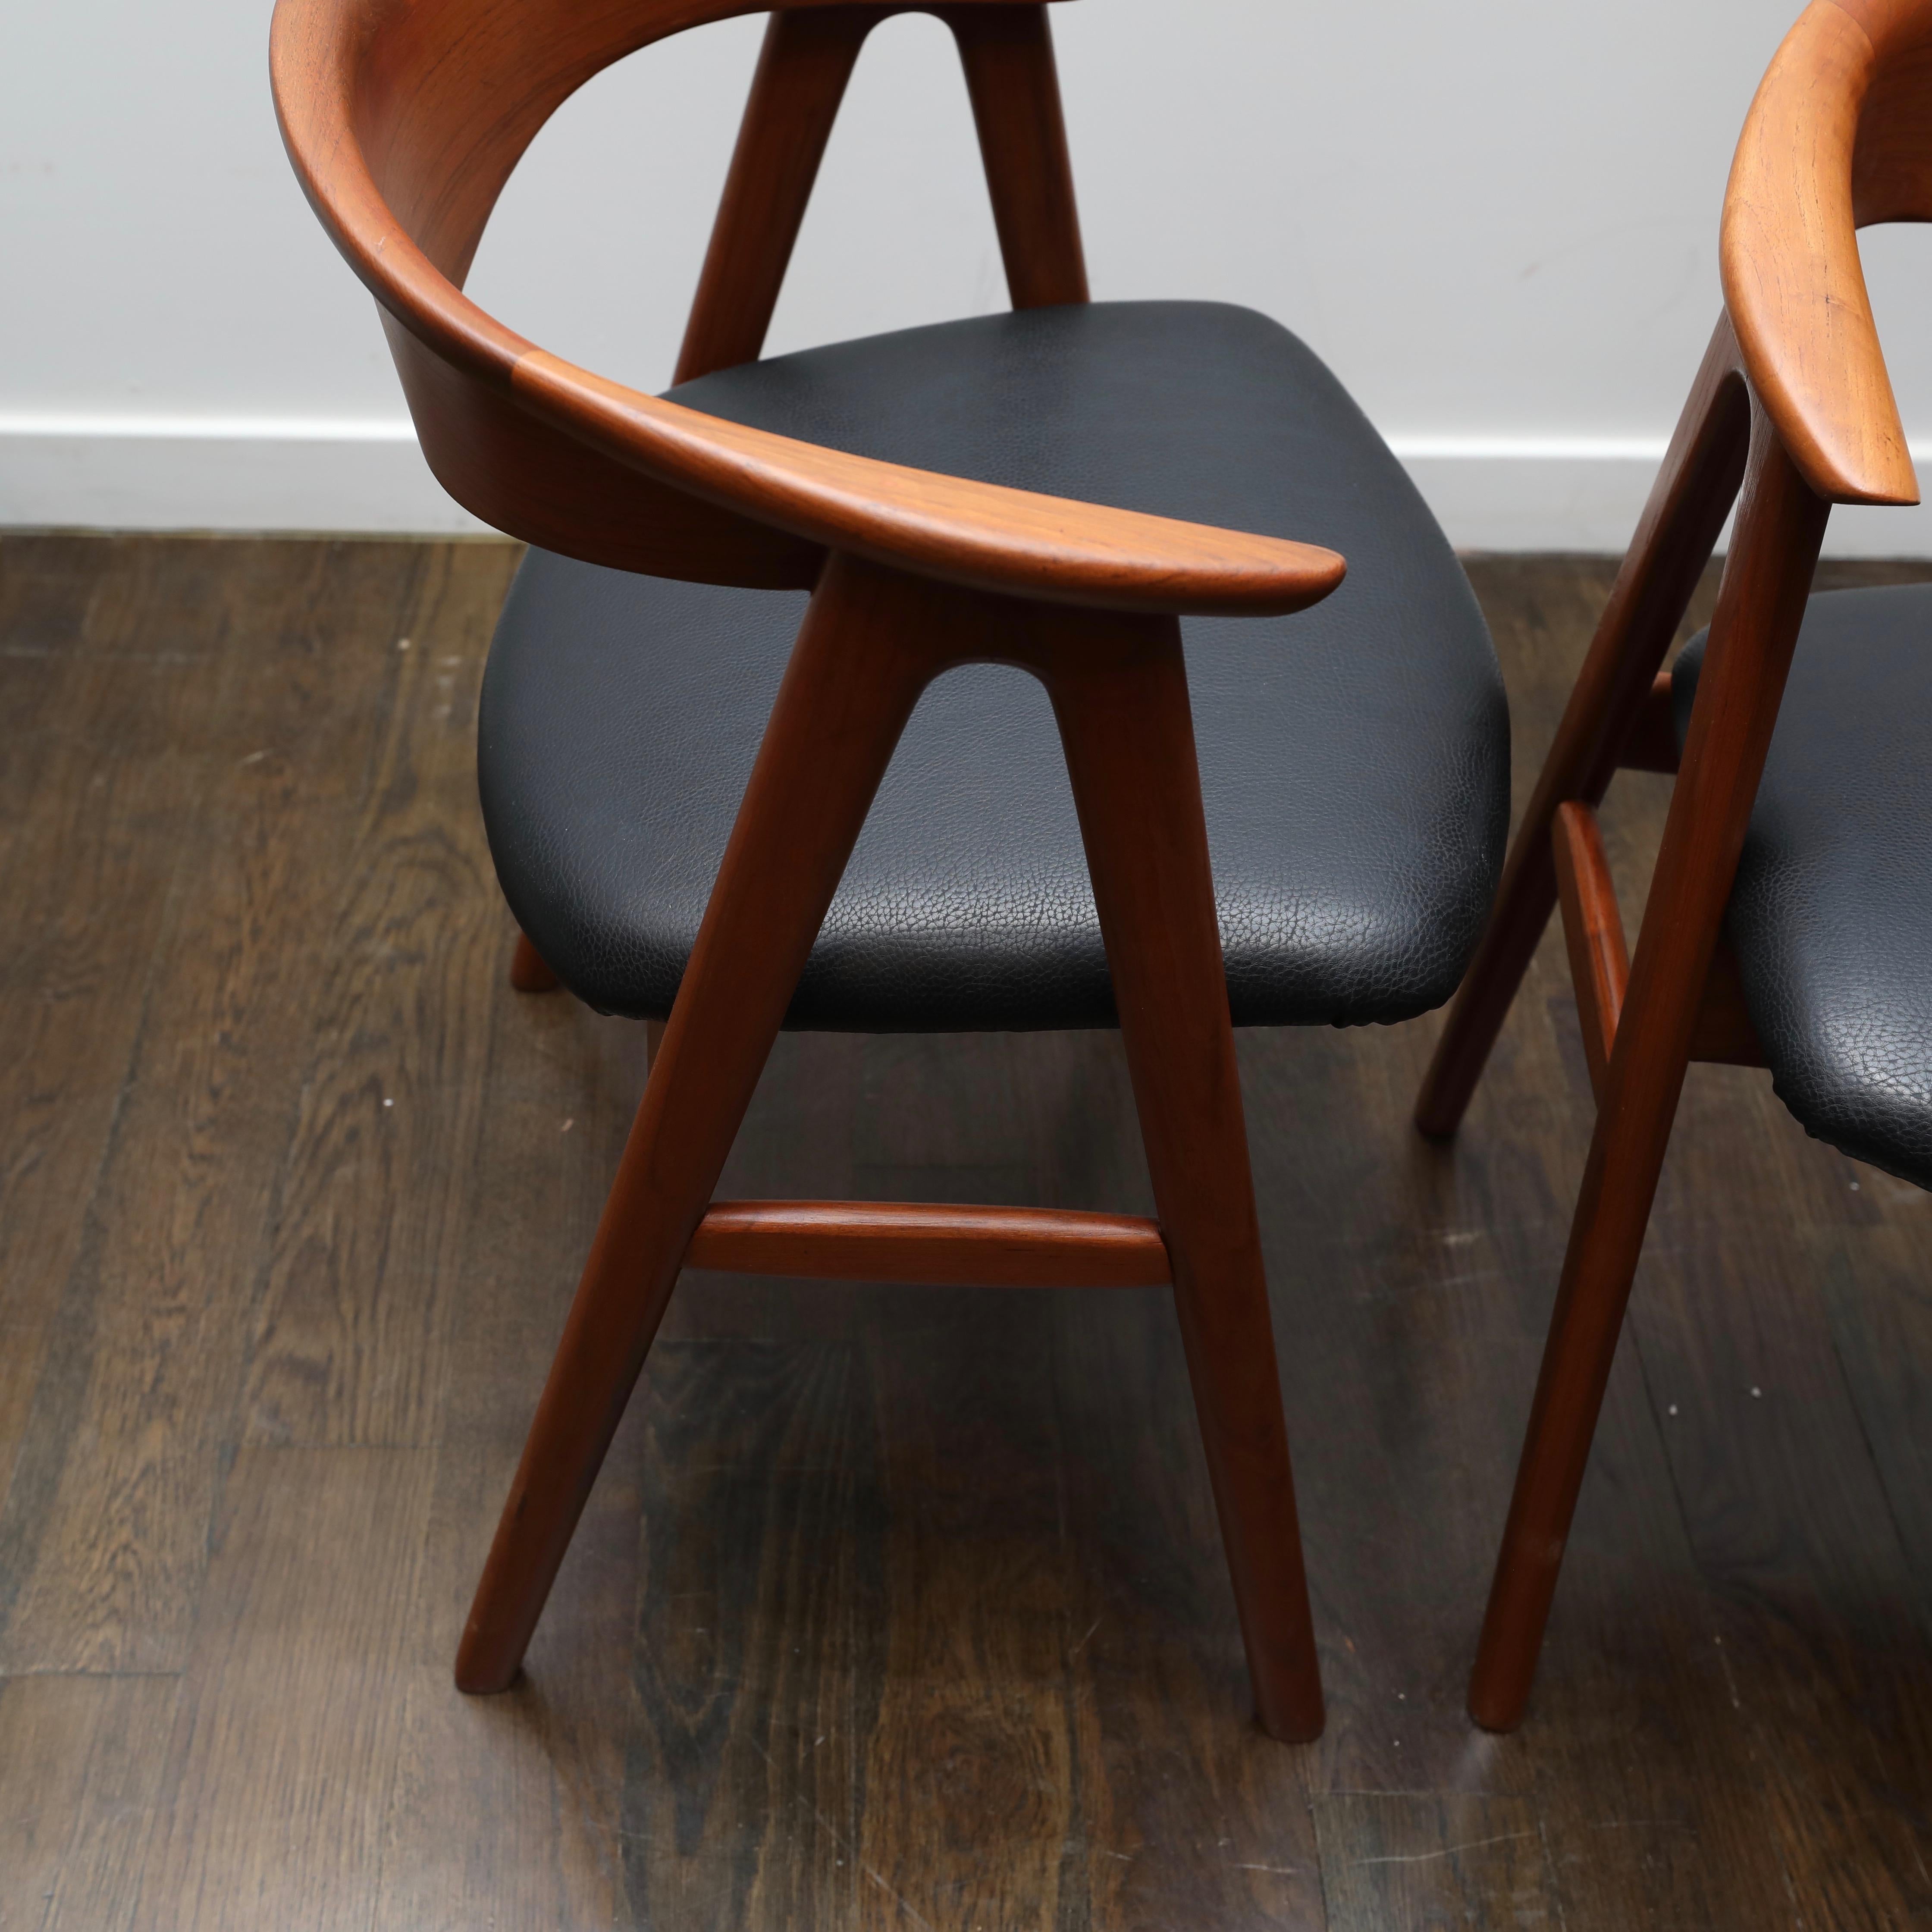 Beautifully restored pair of teak armchairs by Erik Kirkegaard from the 1960s. Brand new leather upholstered seats.